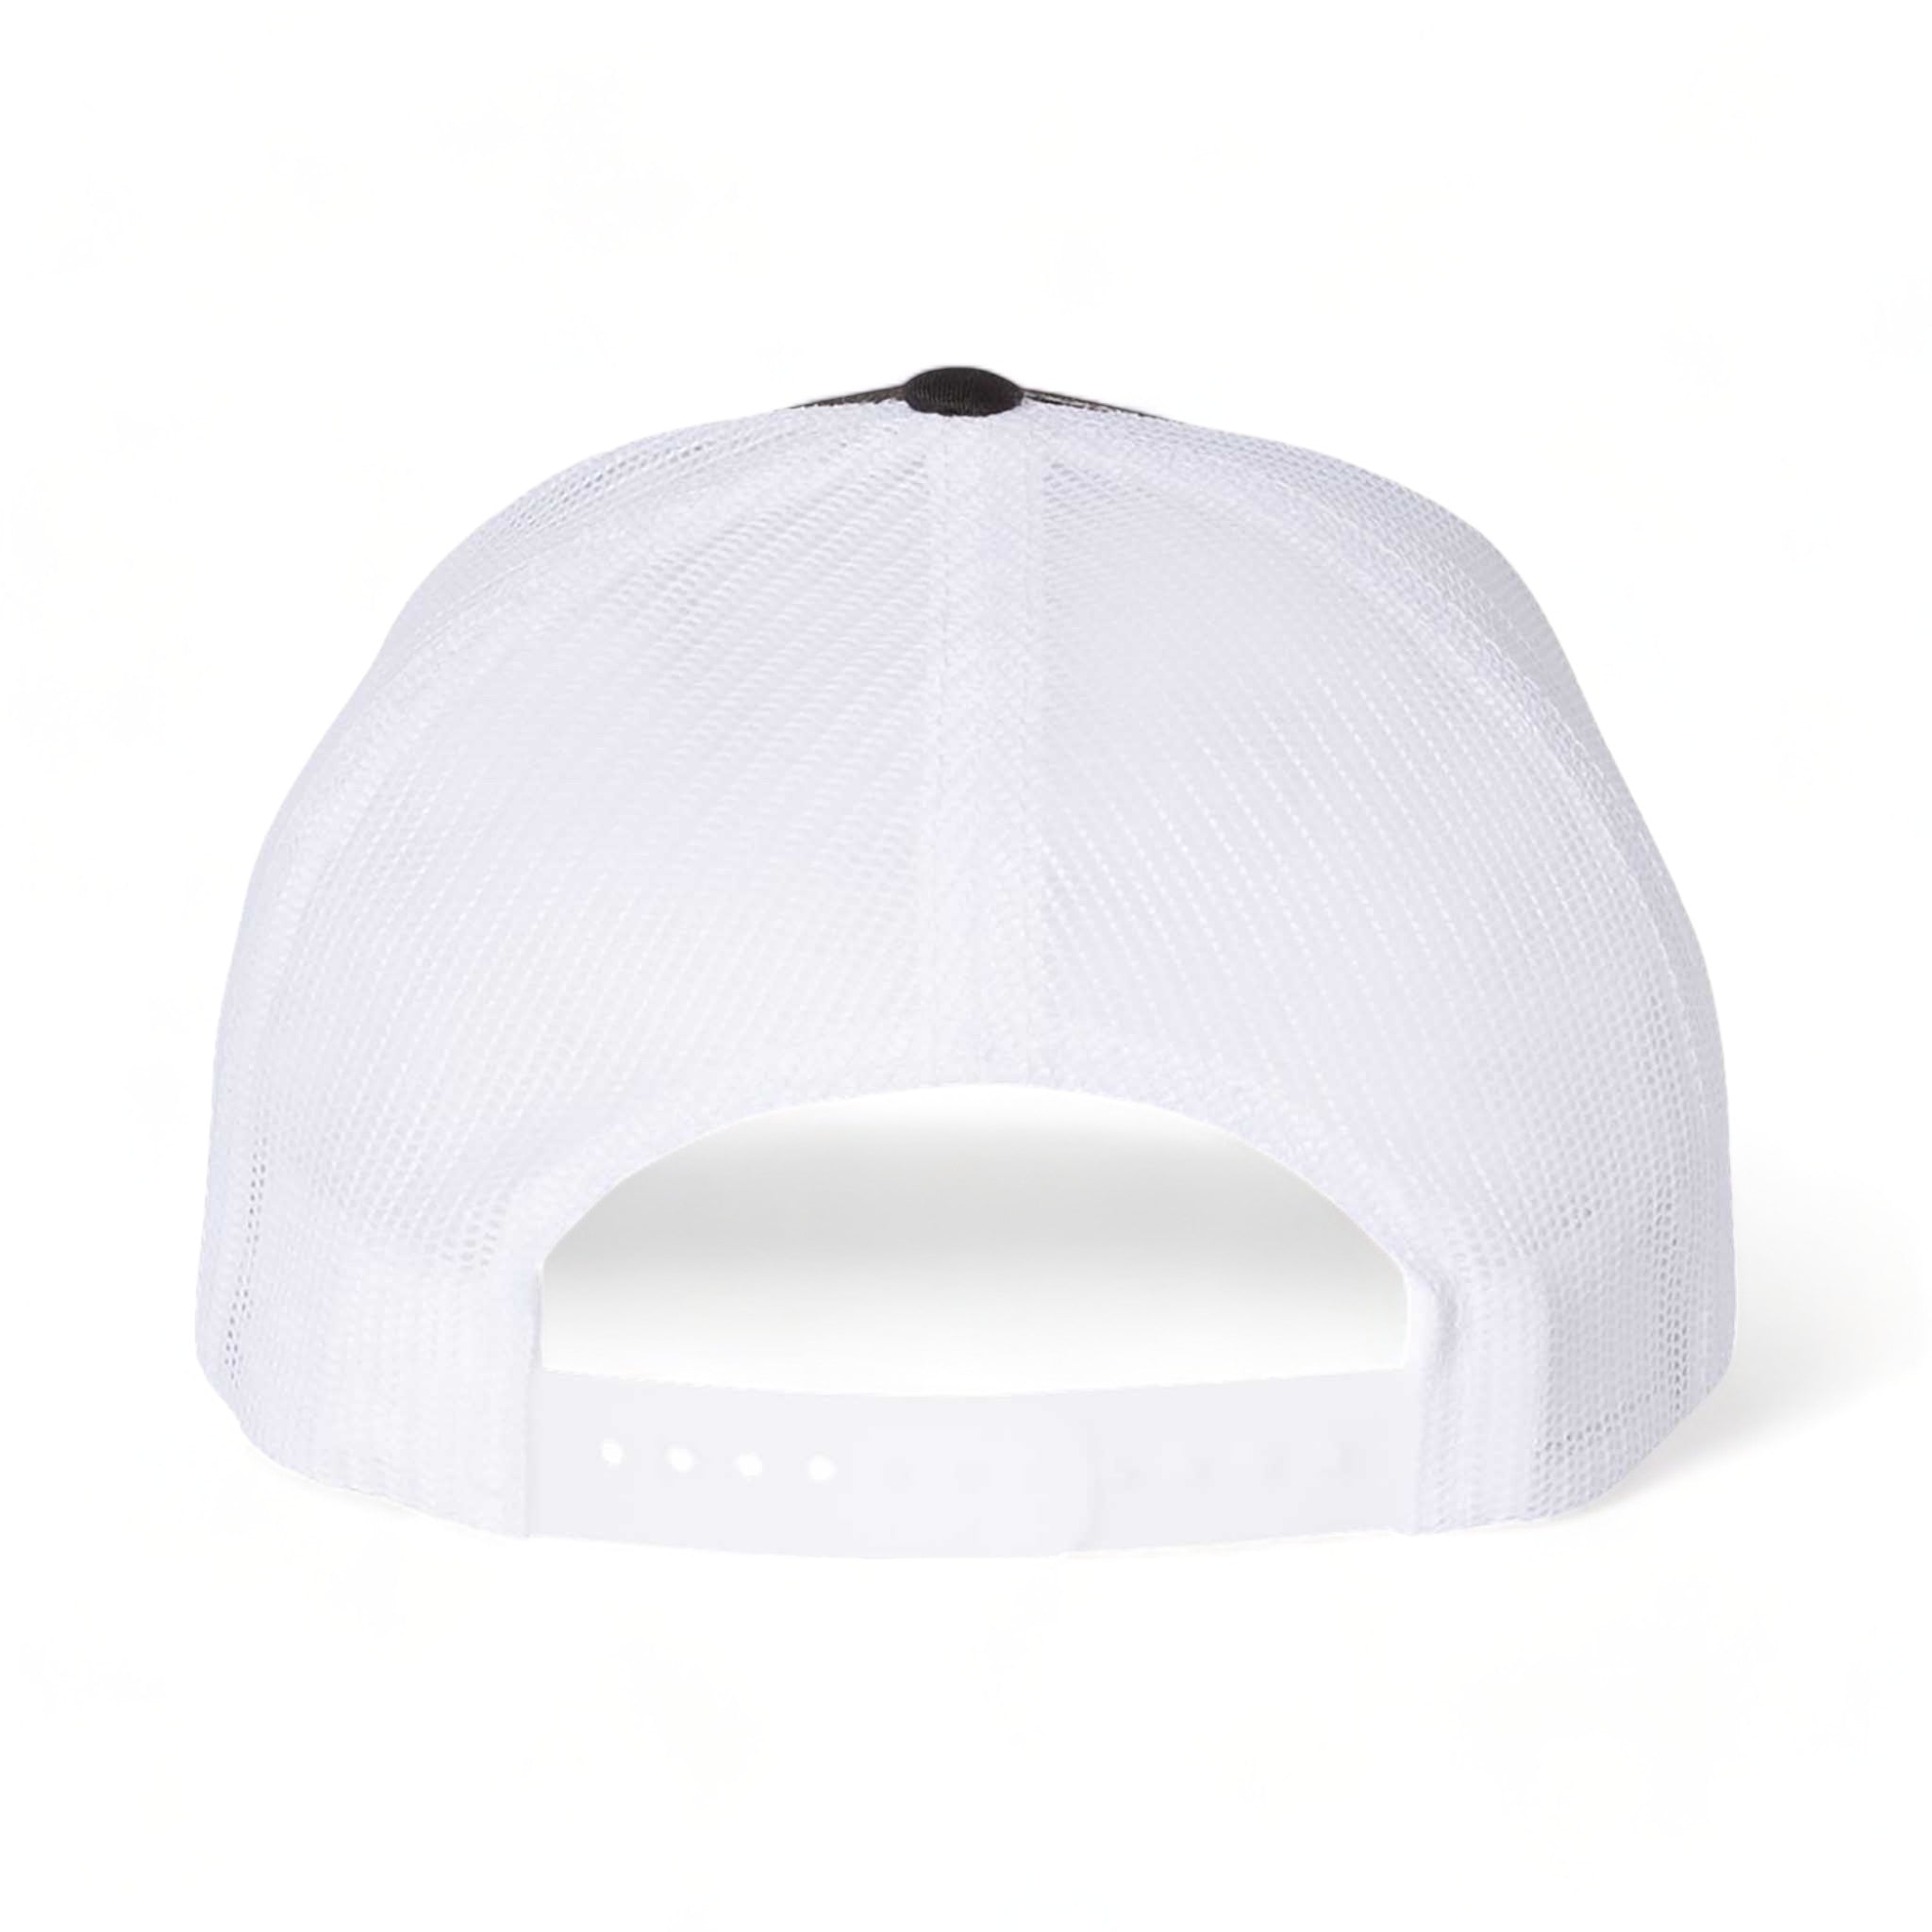 Back view of Richardson 112FP custom hat in black and white